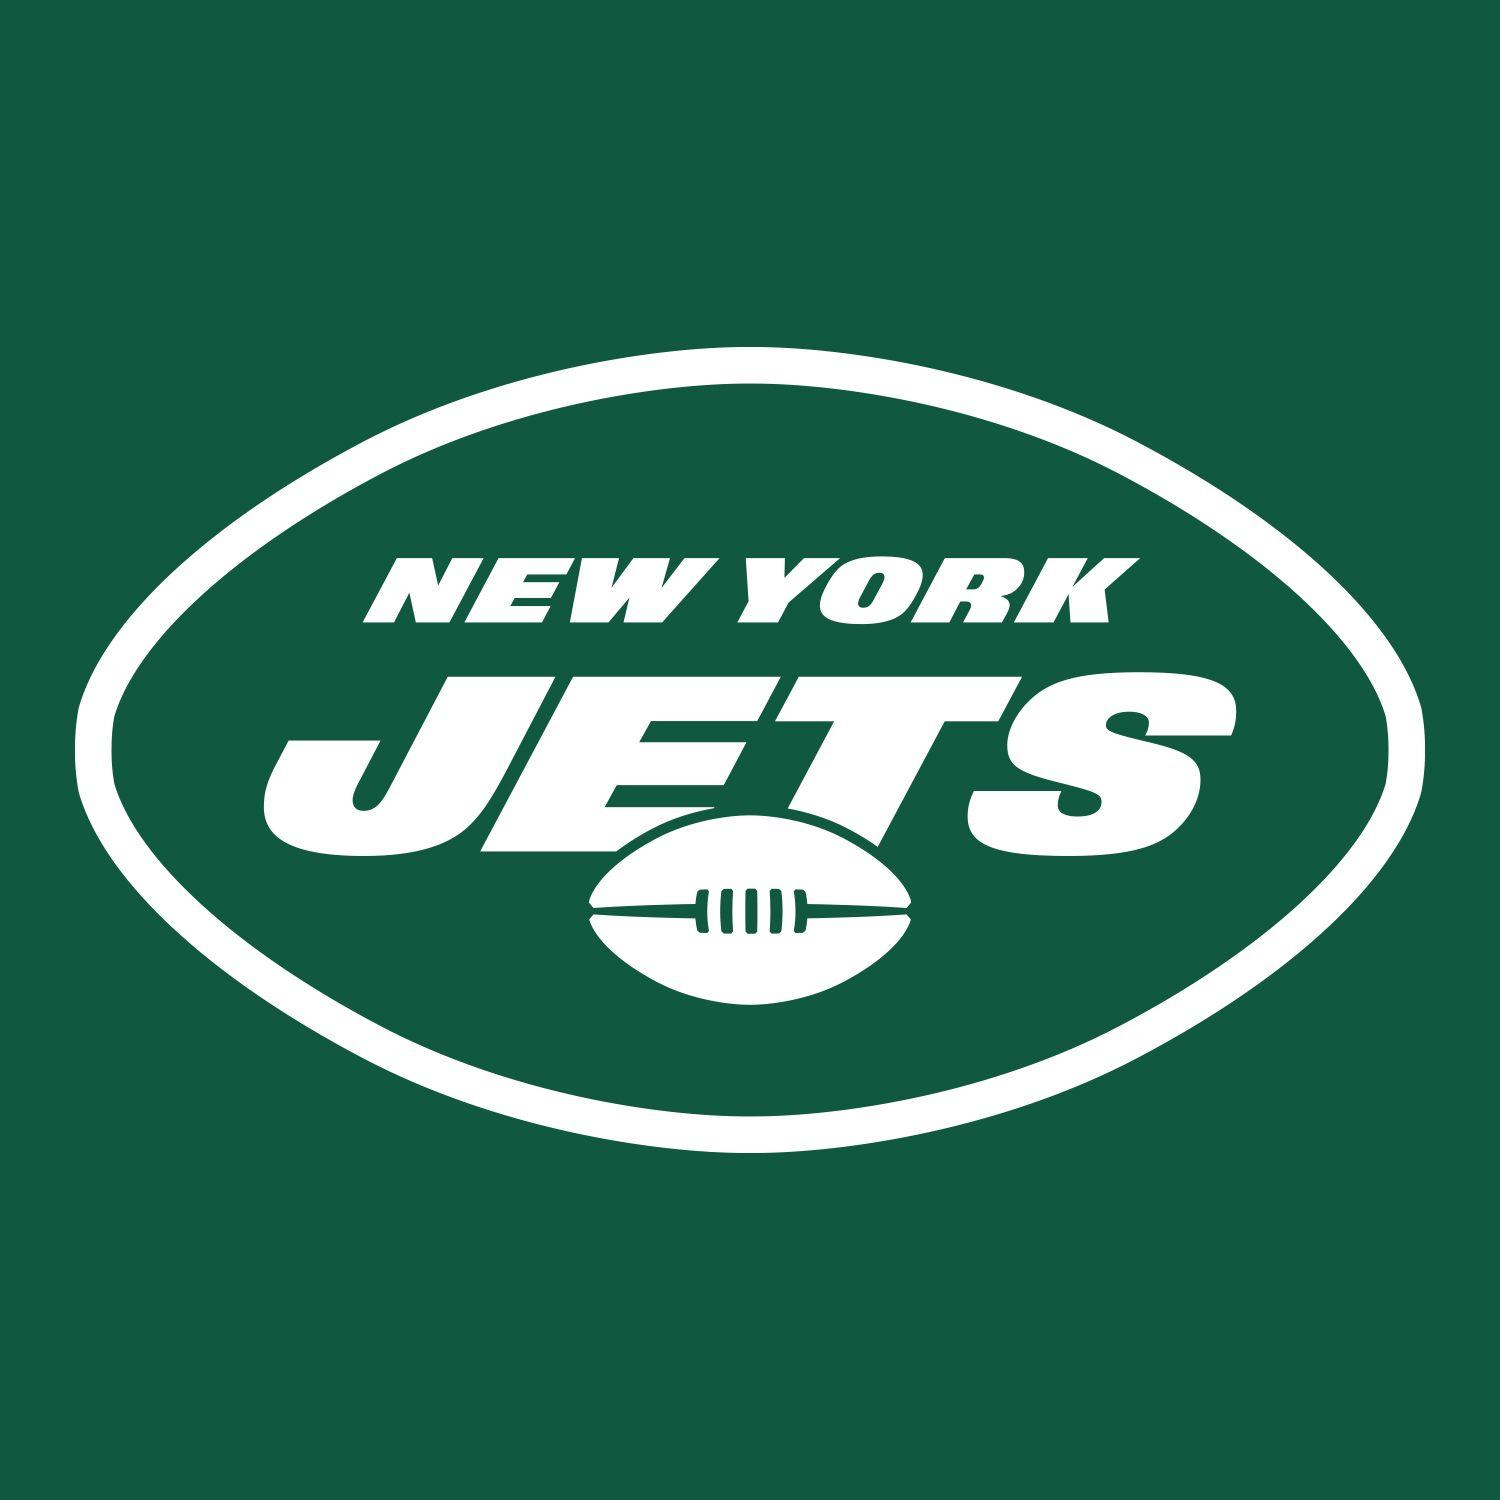 NYJ Logo - Official New York Jets